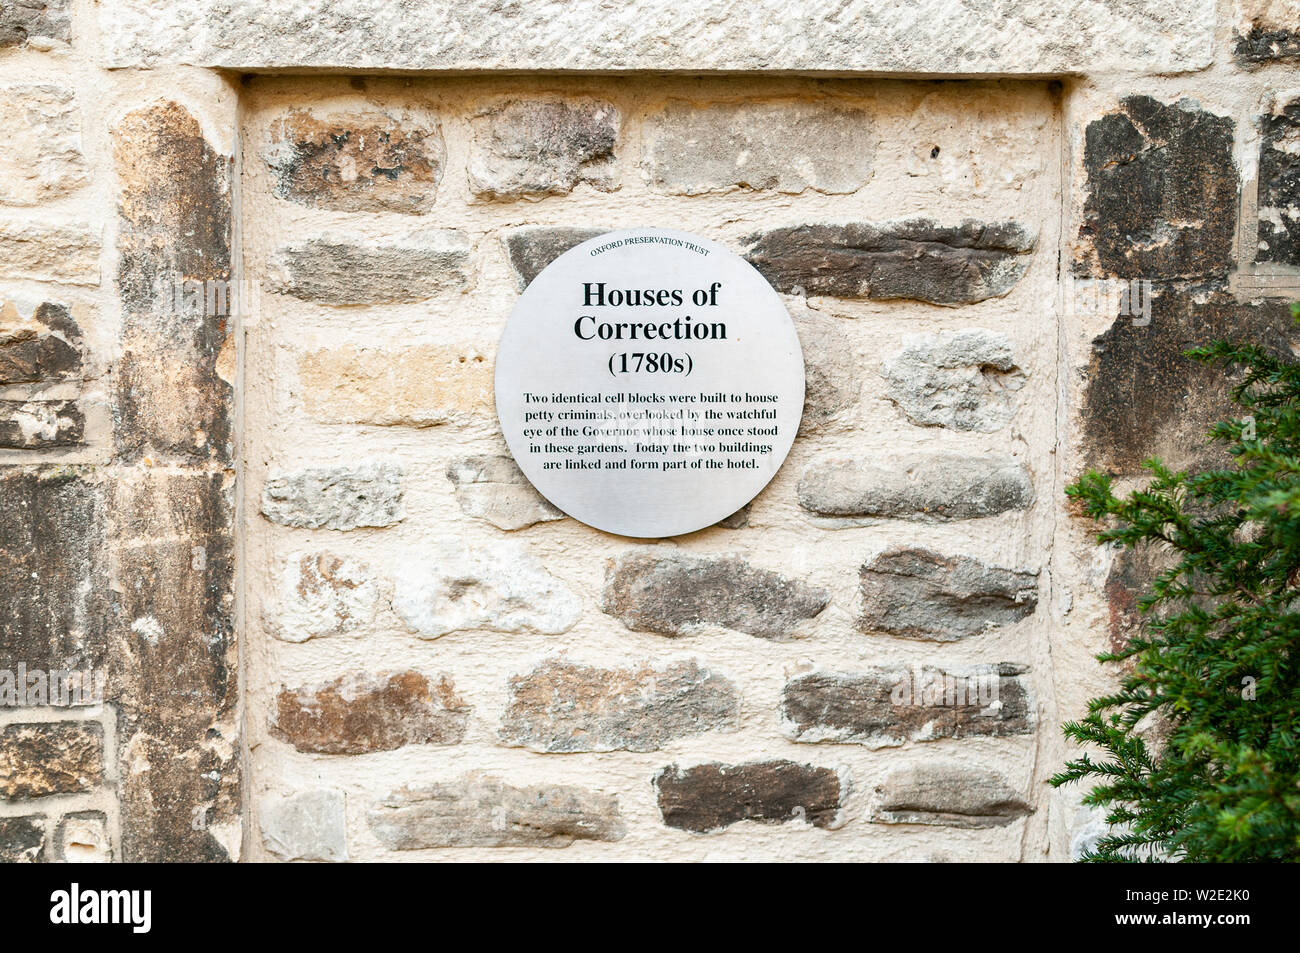 Houses of Correction plaque at Oxford city castle. Stock Photo